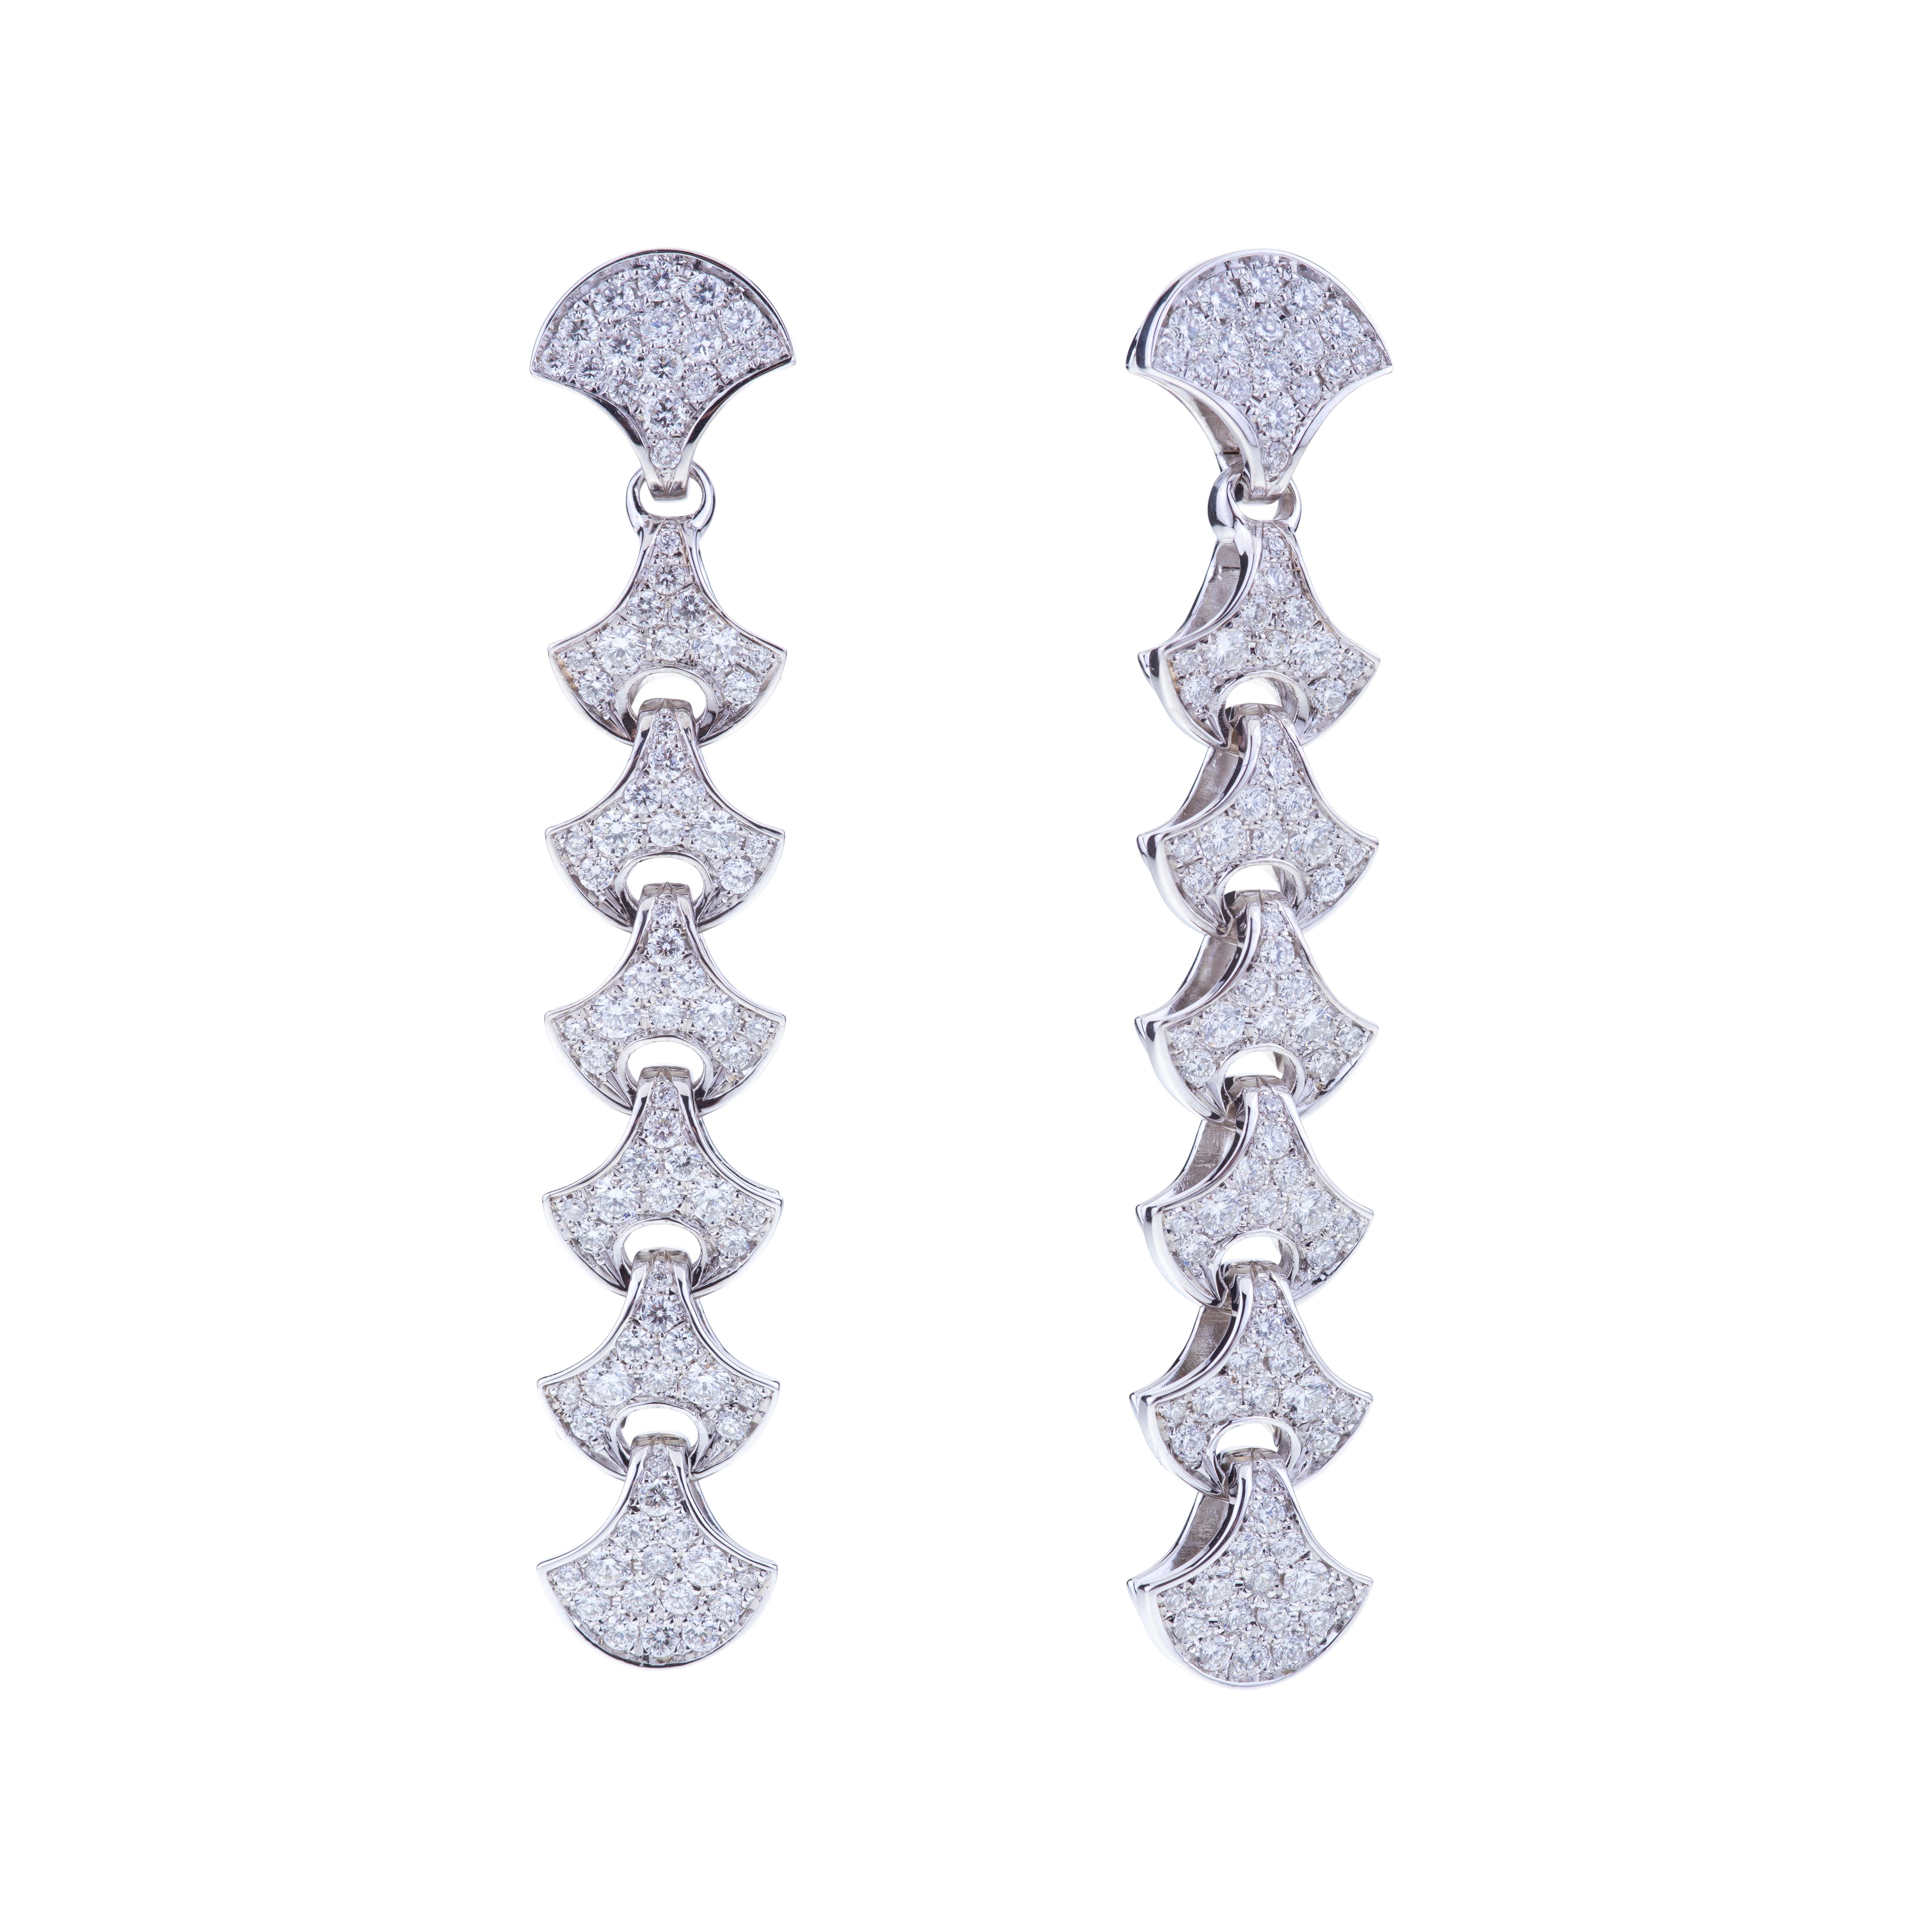 Wave Tennis Earrings by Angeletti White Gold with Fan Shaped Gold and Diamonds.
Special occasion for these Fashionable Earrings with a Unique Design with Diamonds ct. 2.42 G-VS. The Weight of 18kt Gold is around 21 grams. 
Angeletti Boasts an